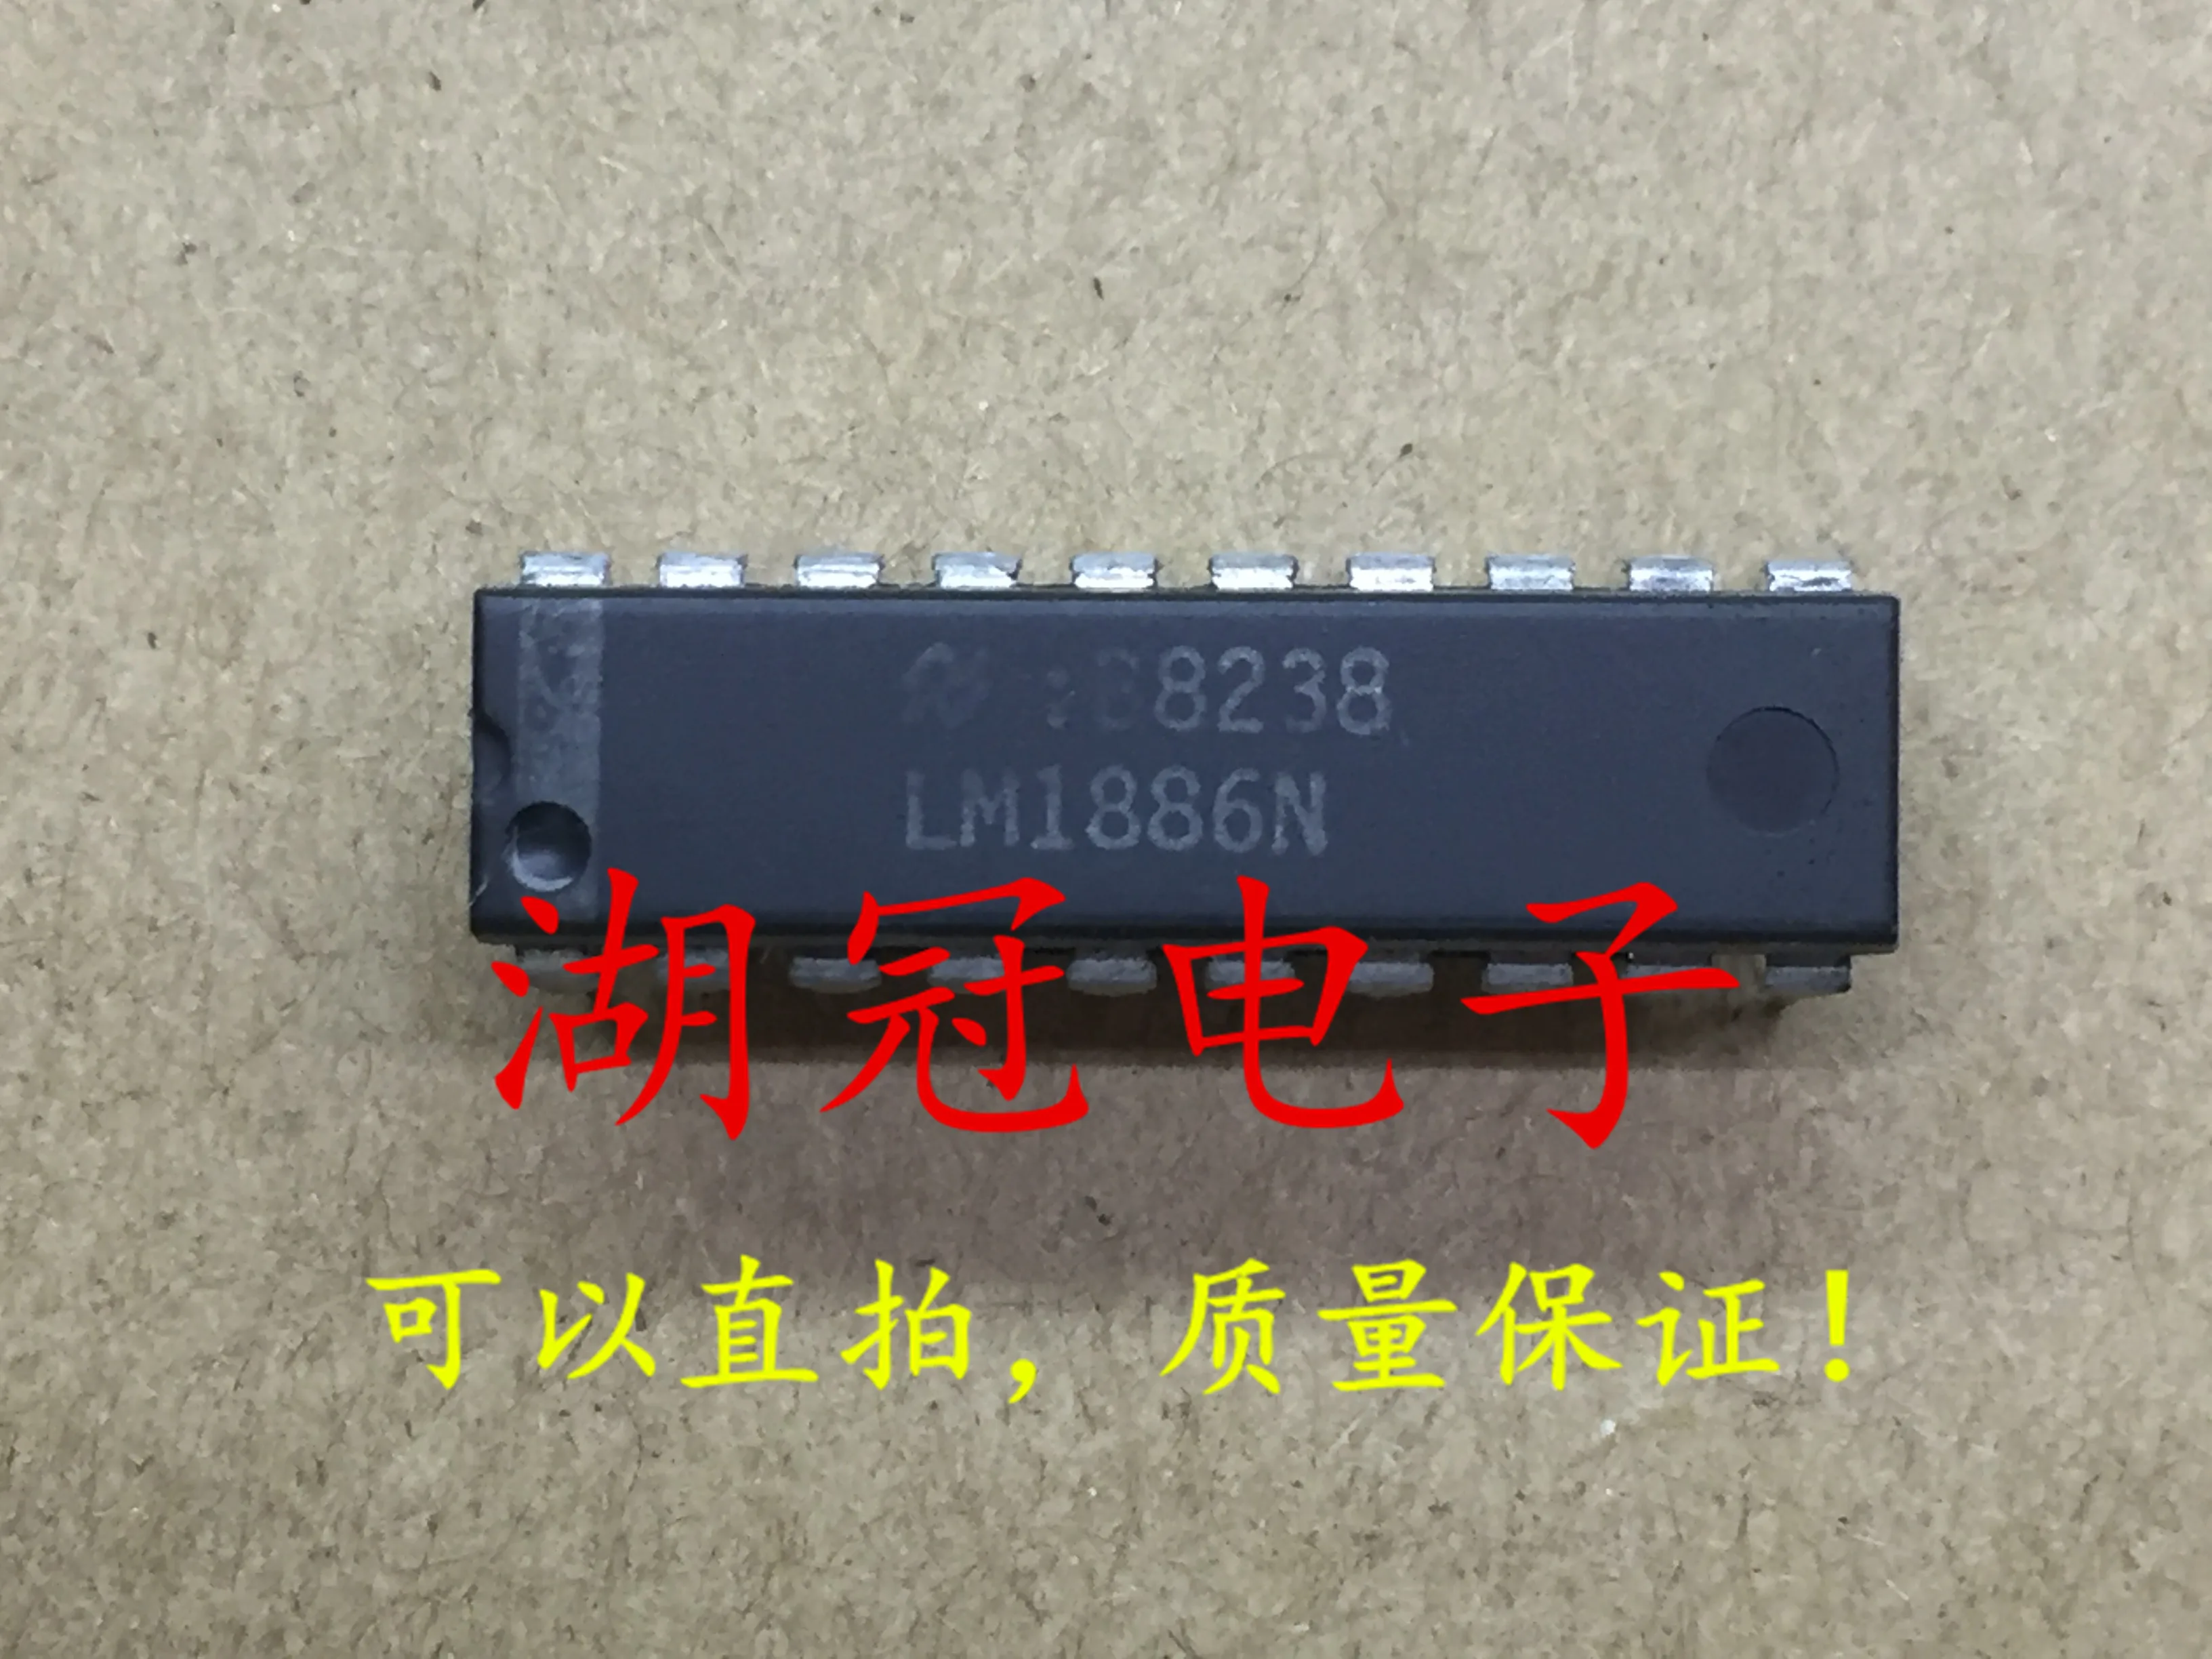 

10pcs original new LM1886N tested DIP well